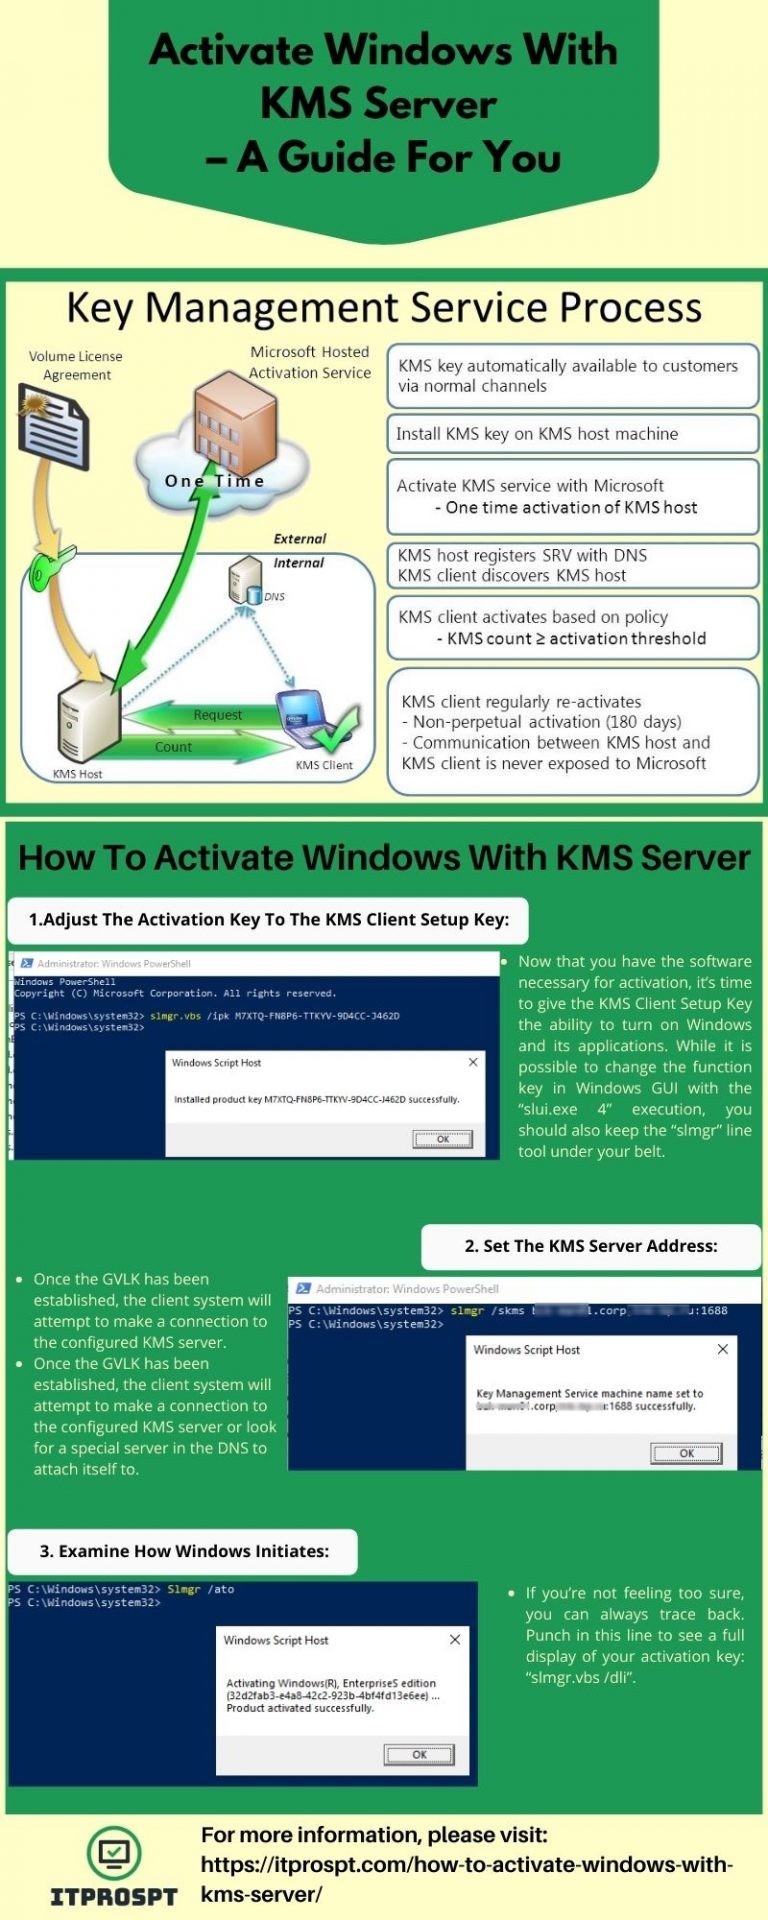 How To Activate Windows With KMS Server - Itprospt